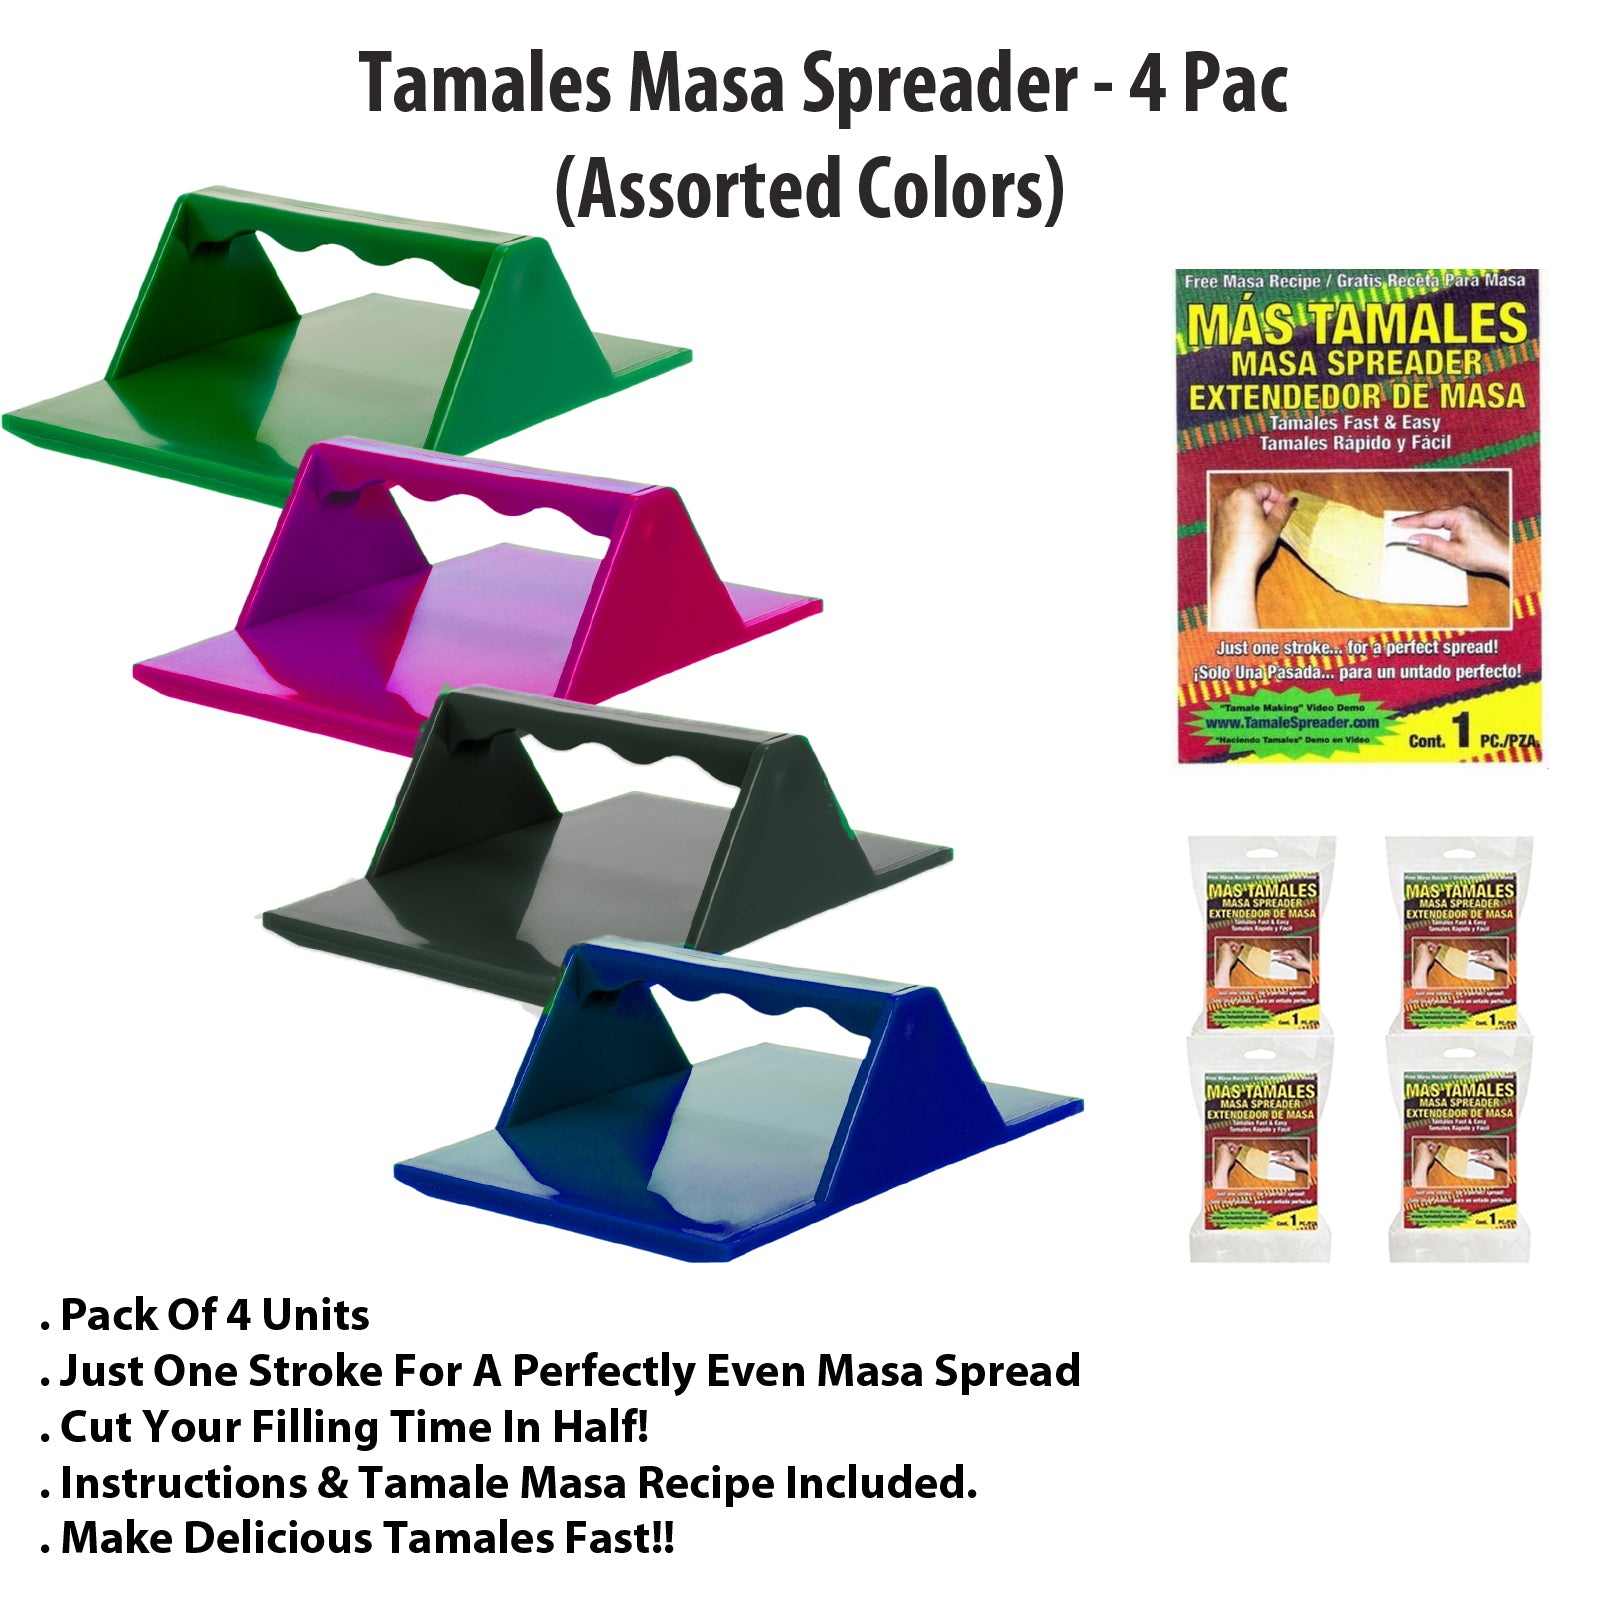  Tamale Masa Spreader Tool (2 Pack, Green) Masa Spreader for  Tamales, Espátula Para Hacer Tamales, Maker for Wrappers & Corn Husks,  Extendedor de Masa Para Tamales, Tamale Spatula with Precision Guides